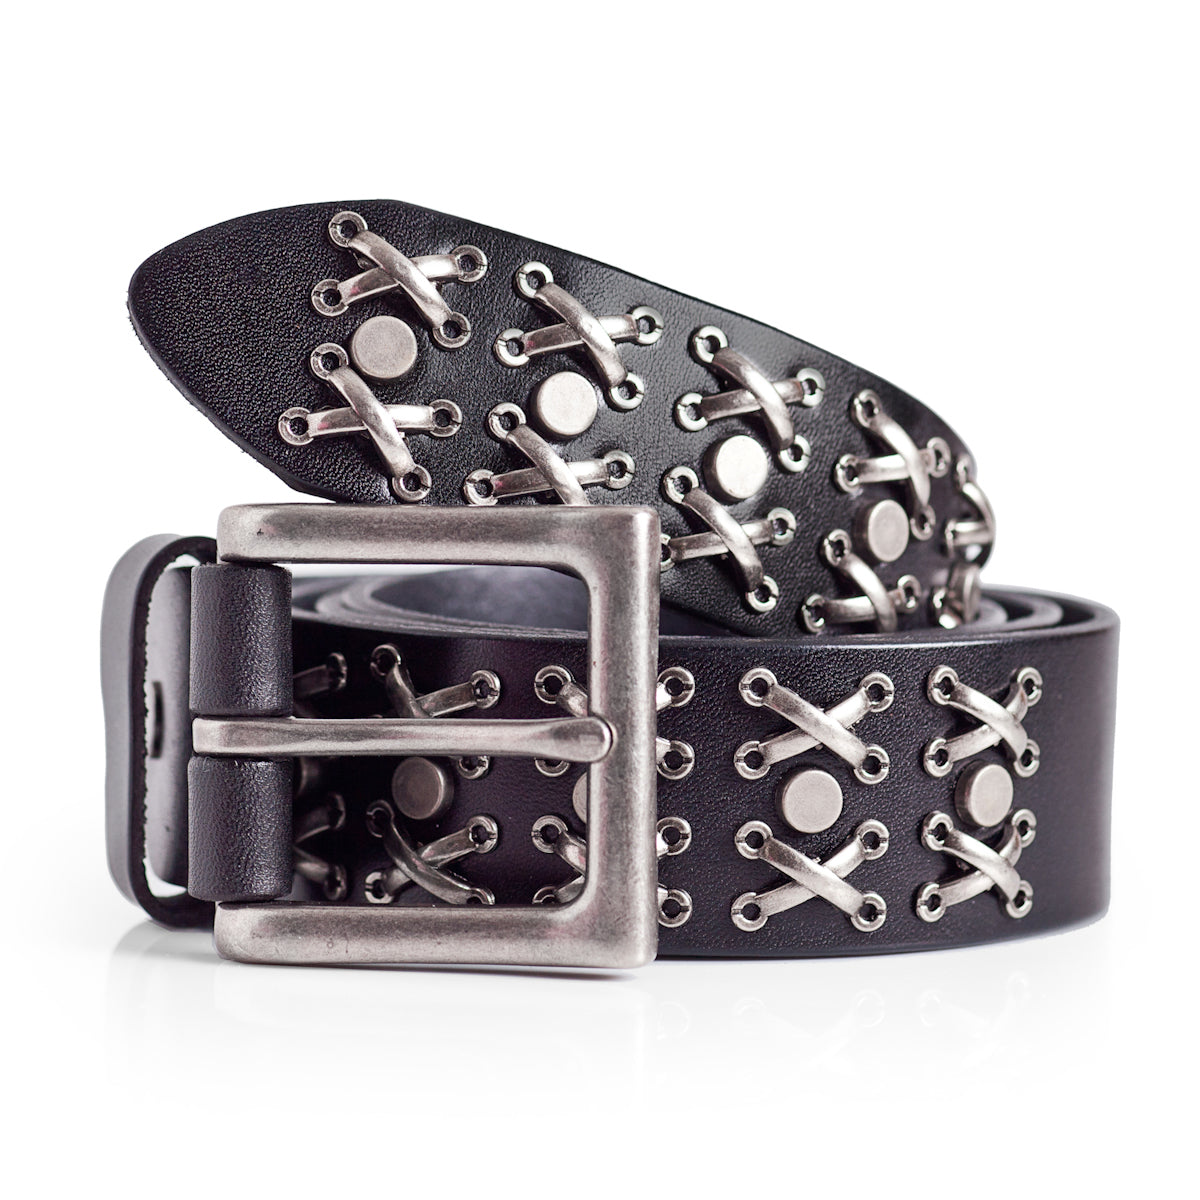 Leather Belt Made in Spain Ideal for a Gift 